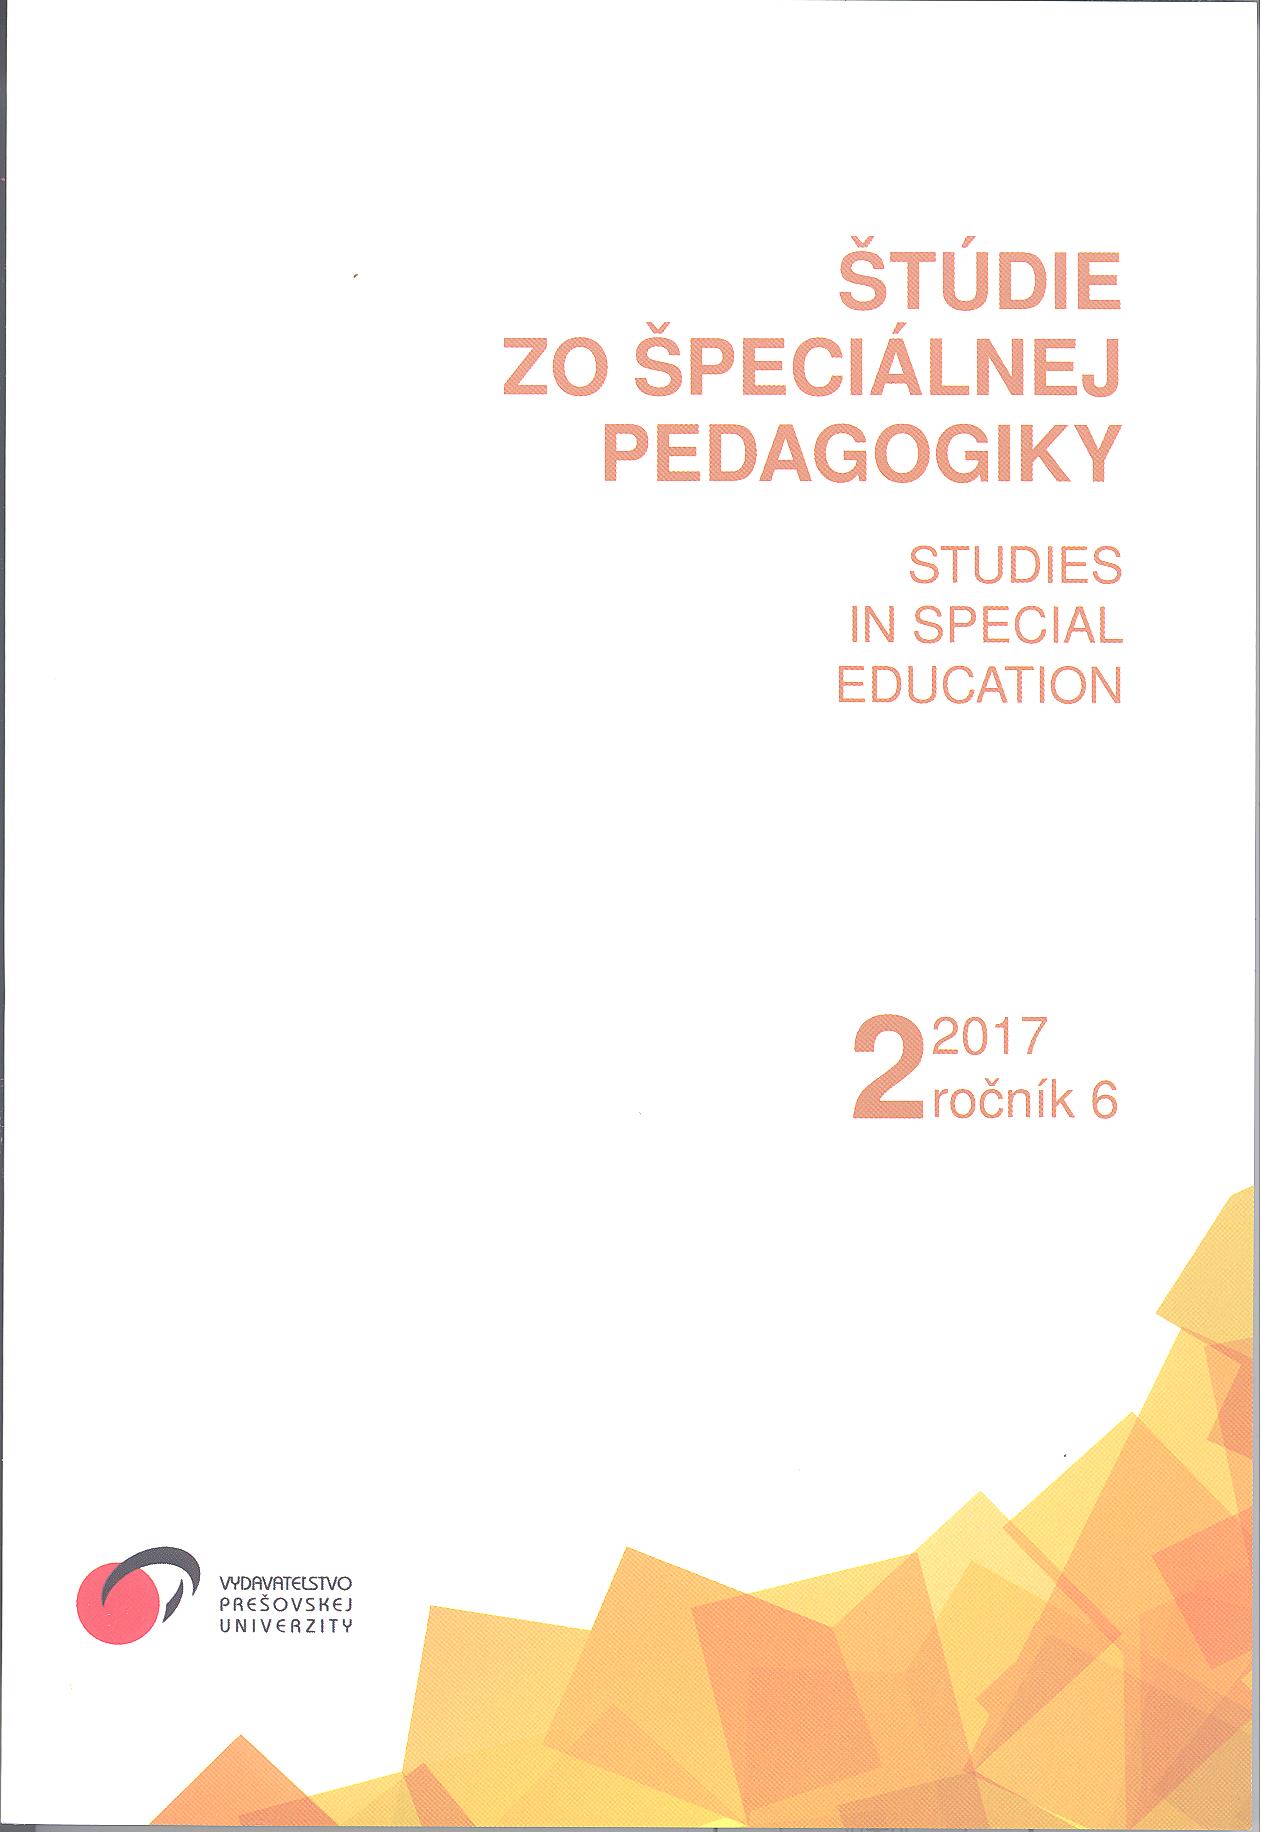 Annual Report of the Grant Project APVV-15-0071
A Man with Handicap in the Literature for Children and Youth (2016 – 2020) Cover Image